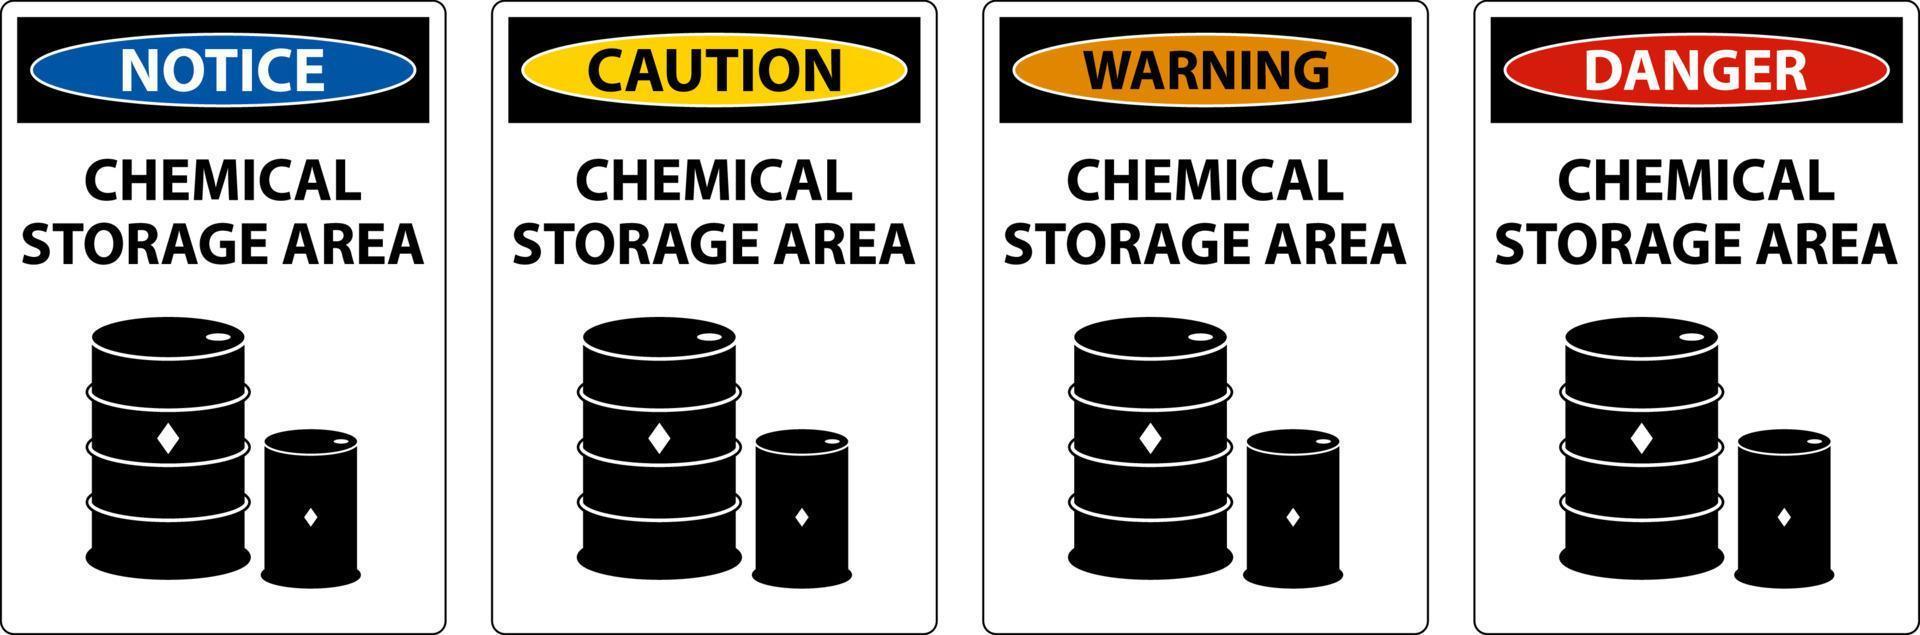 Chemical Storage Area Sign On White Background vector